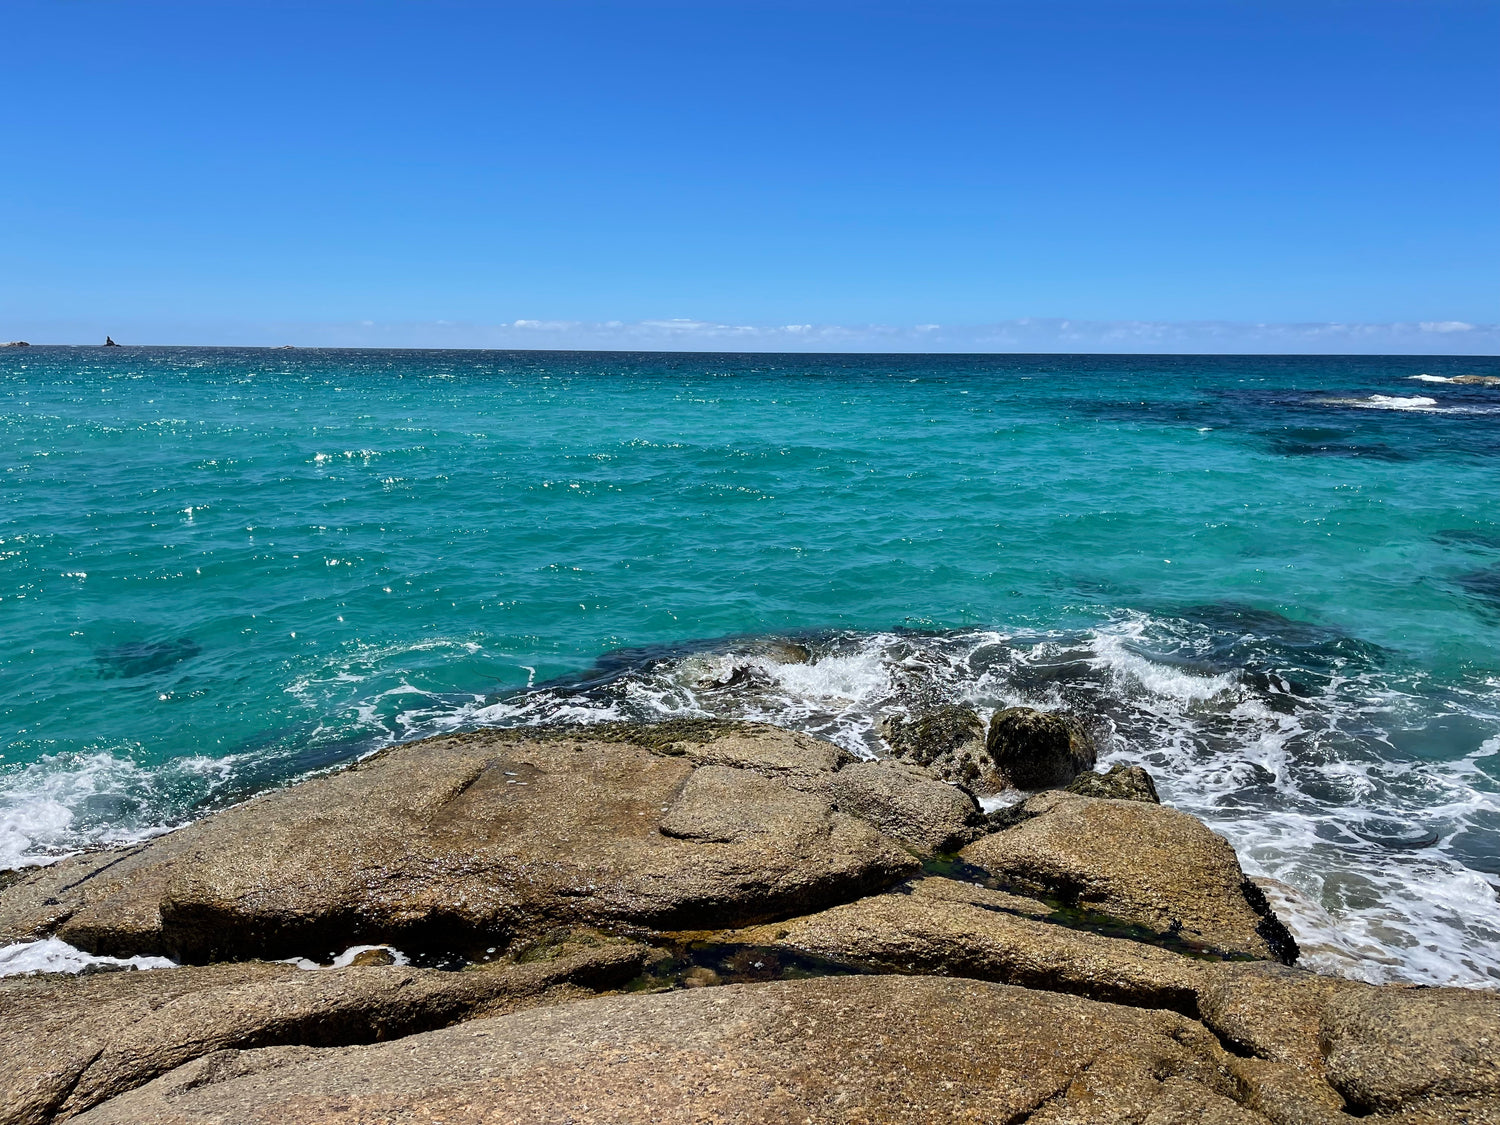 A photograph taken from some rocks on the beach foreshore. In the foreground are some brown rocks, and then crystal clear turquoise water, with a cloudless blue sky.